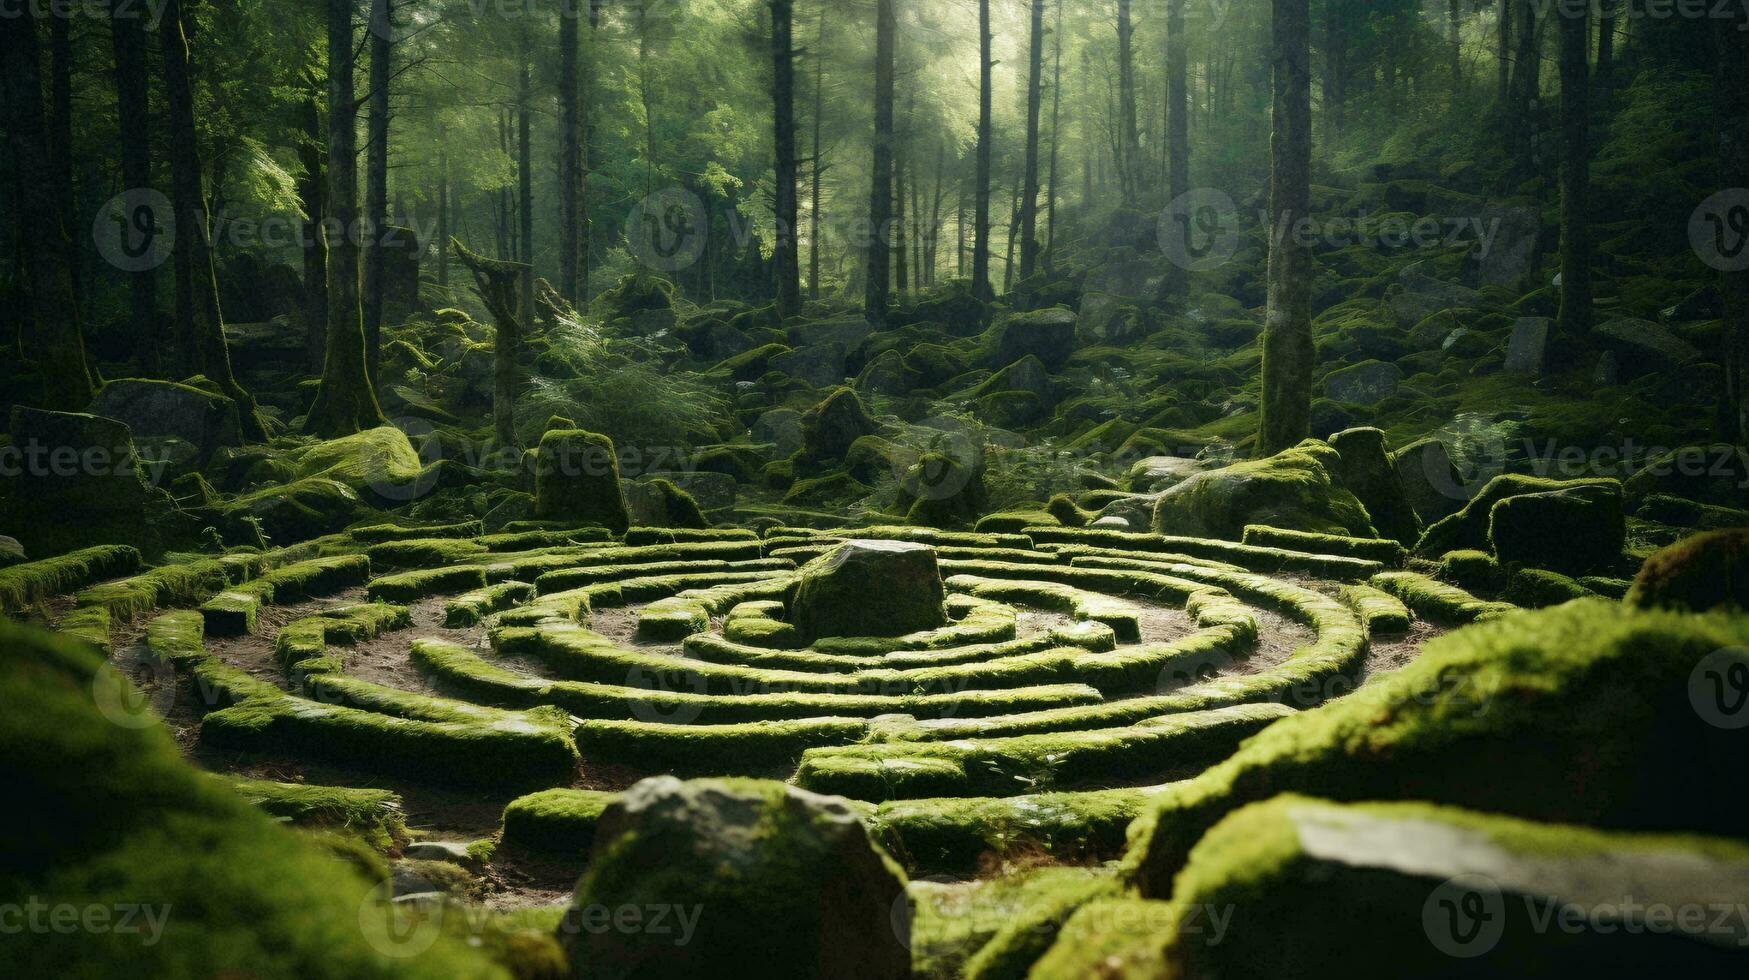 Stock a of the circular maze Vecteezy in nestled 31229436 stunning lush Generated Photo AI heart forest at A